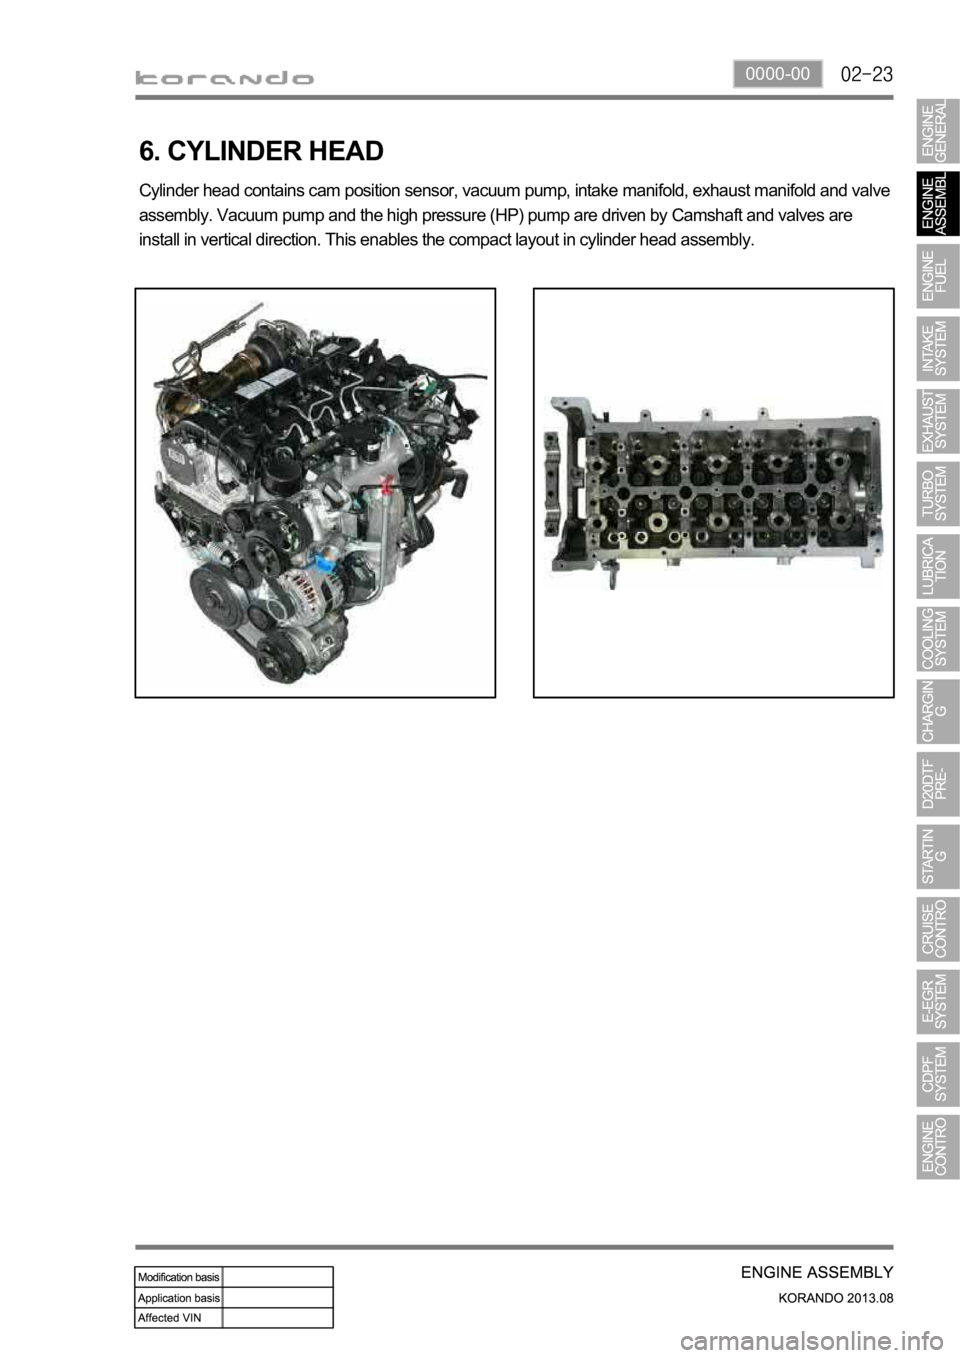 SSANGYONG KORANDO 2013  Service Manual 0000-00
6. CYLINDER HEAD
Cylinder head contains cam position sensor, vacuum pump, intake manifold, exhaust manifold and valve 
assembly. Vacuum pump and the high pressure (HP) pump are driven by Camsh